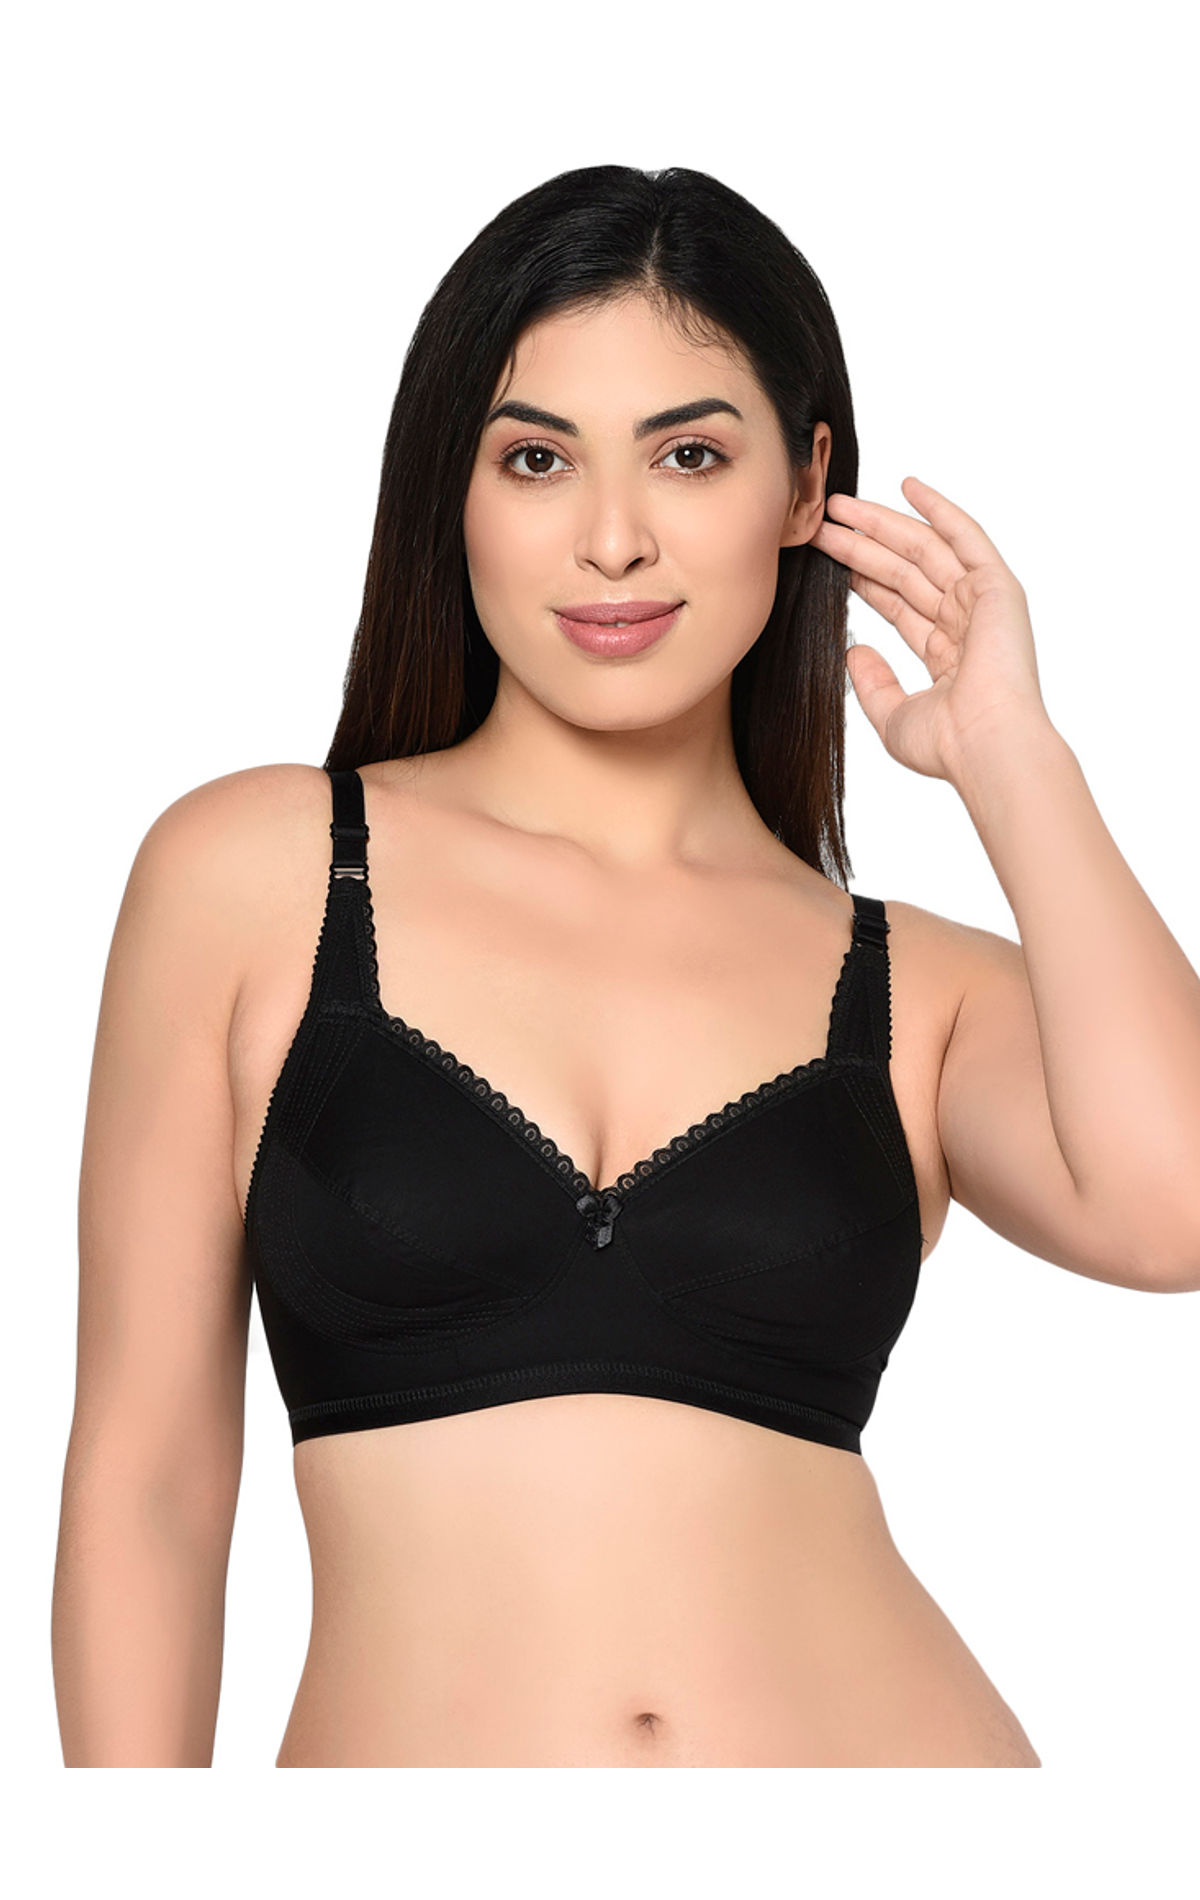 Bodycare Printed Non Padded, Assorted Bra-1571